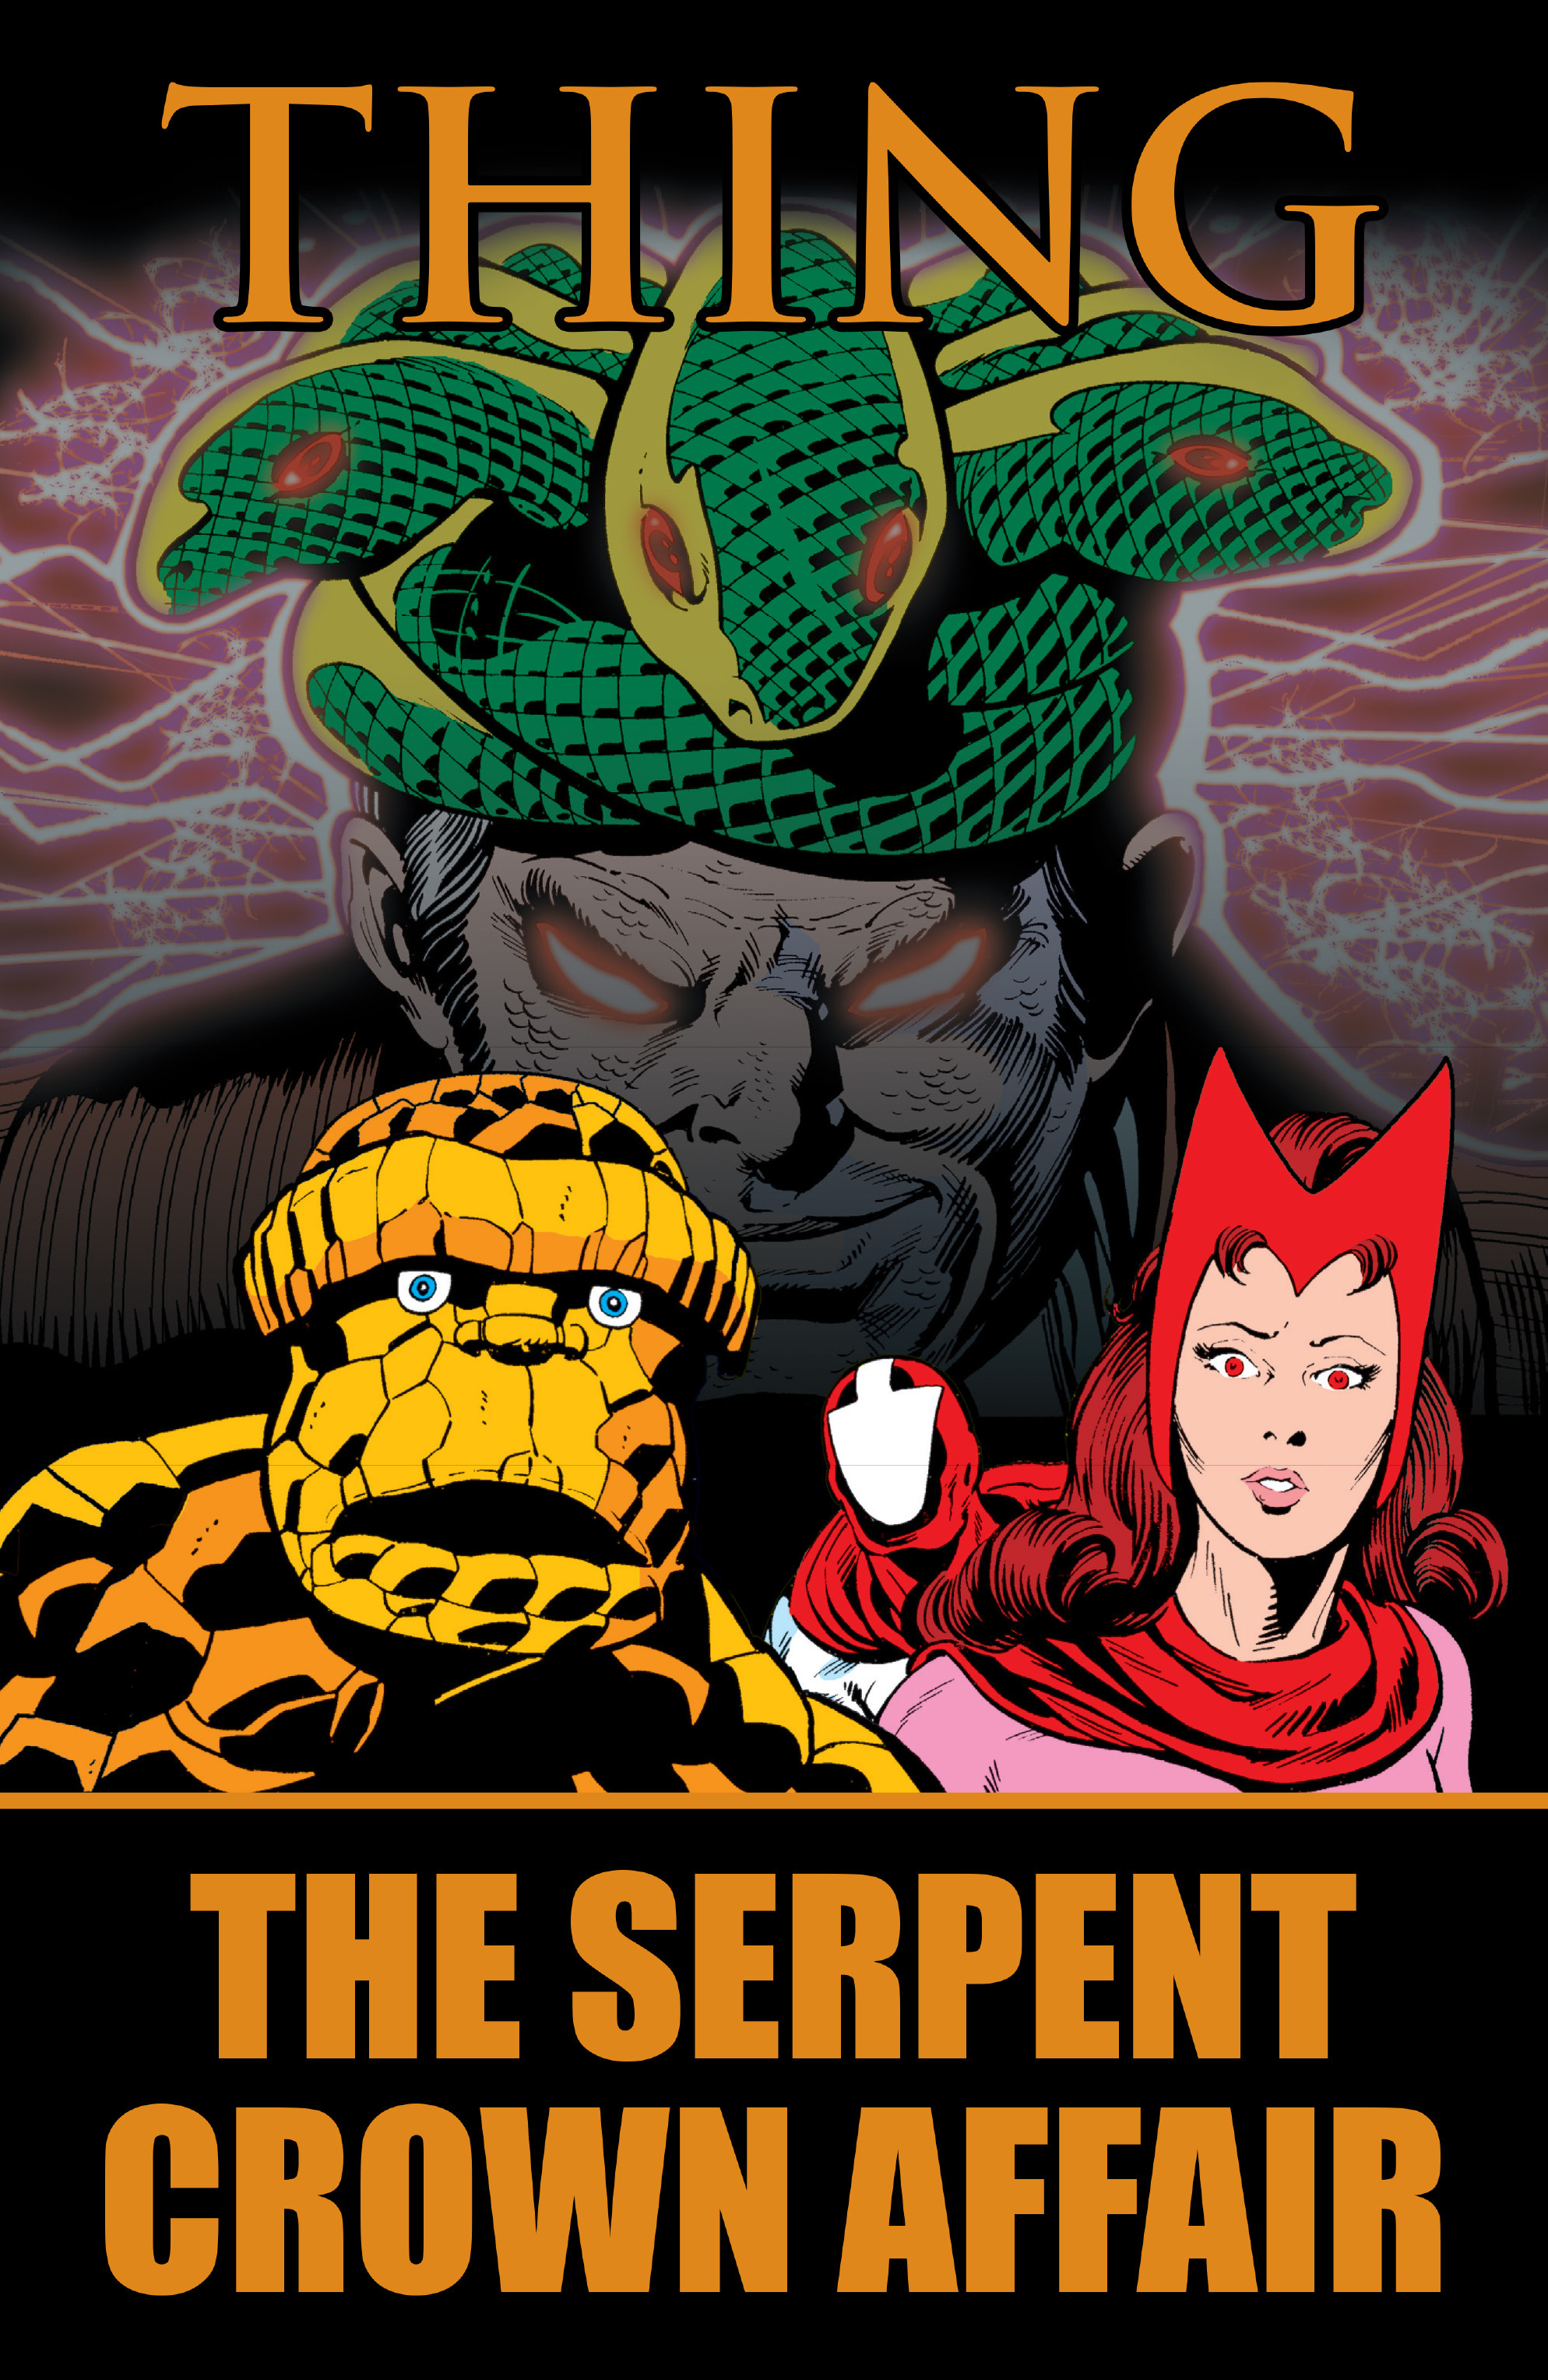 Read online Thing: The Serpent Crown Affair comic -  Issue # TPB - 3